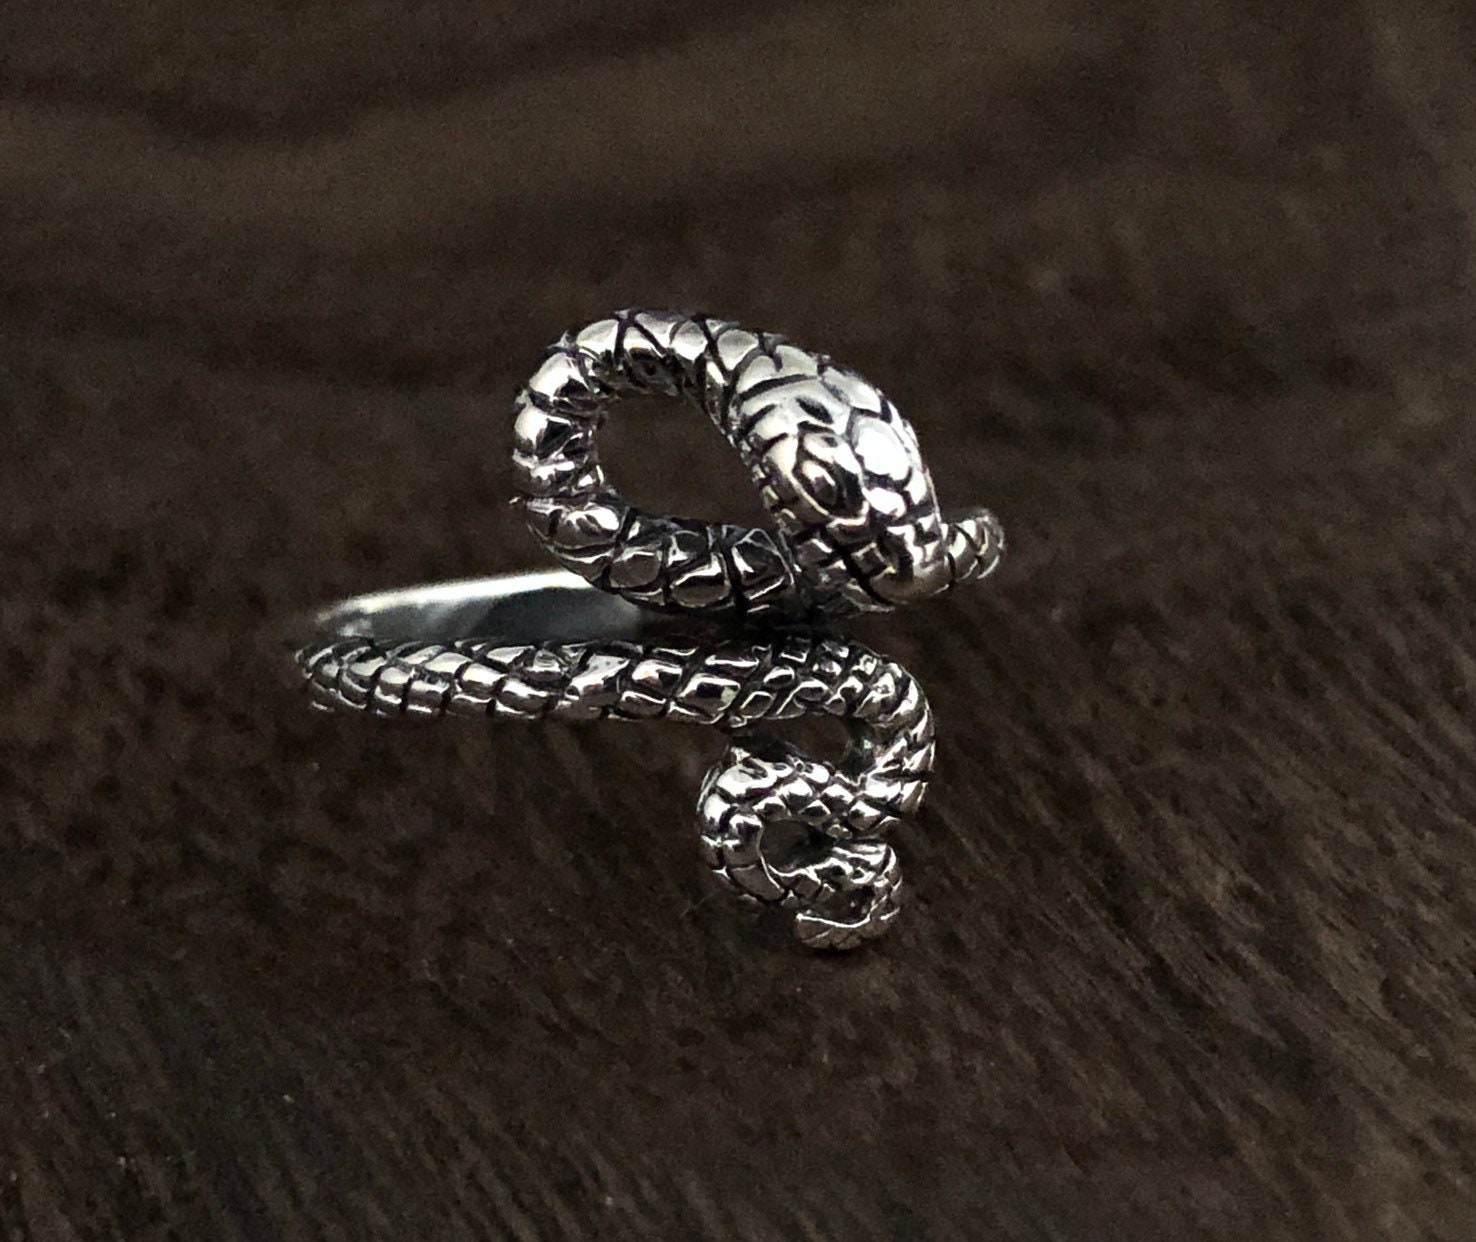 Twin Coiled Snakes Ring with Gemstones in Sterling Silver – Le Dragon  Argenté